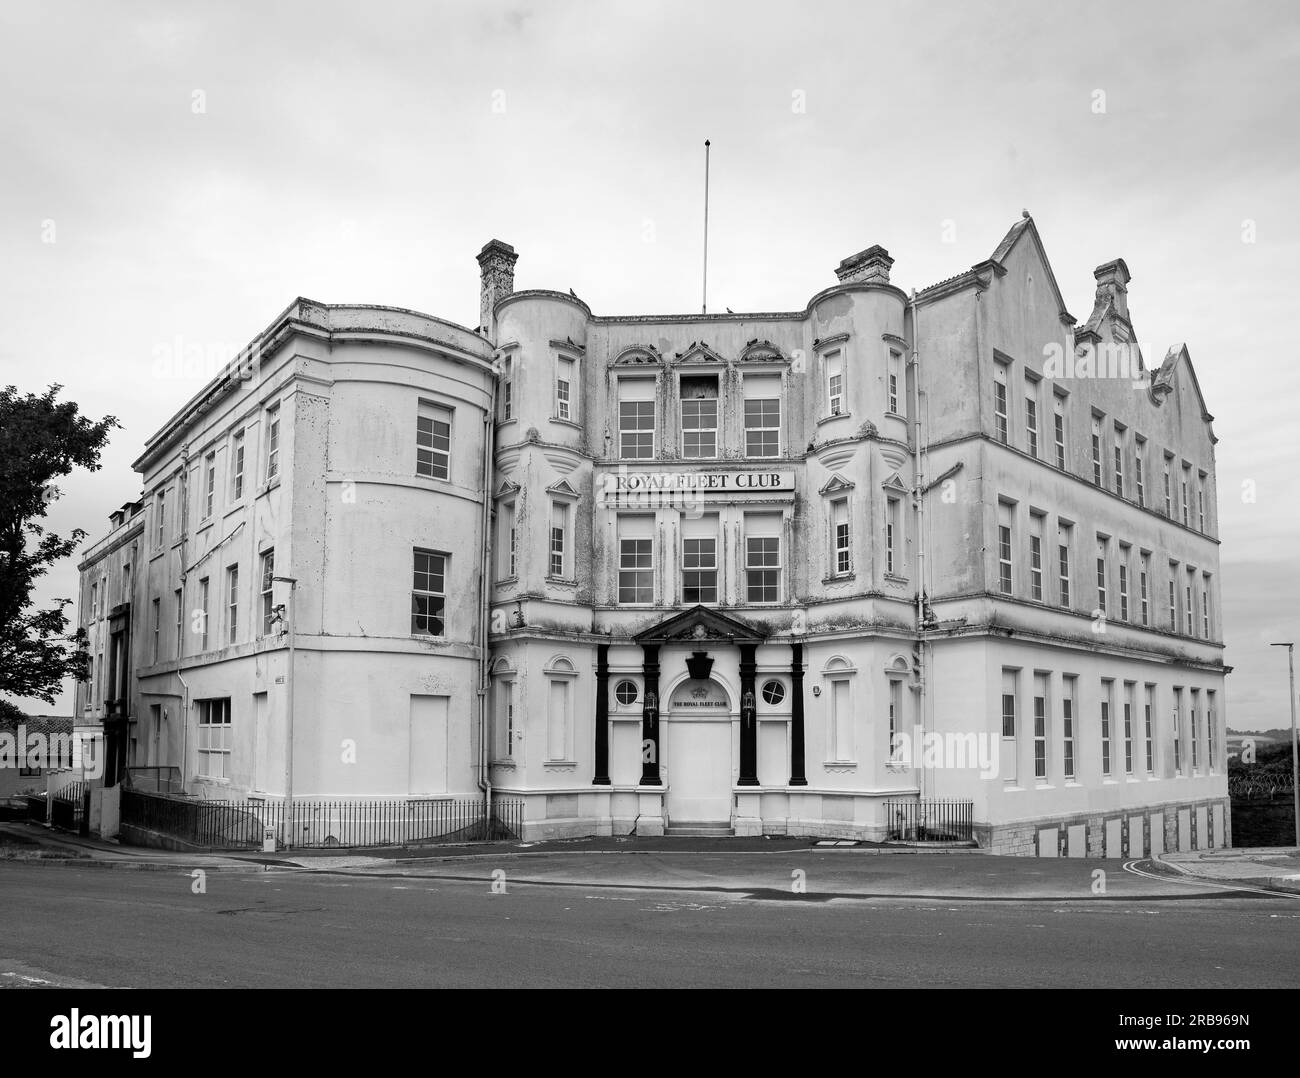 Monochrome image of Looking sad and dejected the former Royal Fleet Club in Devonport, Plymouth. Purchased by the Church of Scientology in 2010 to tur Stock Photo